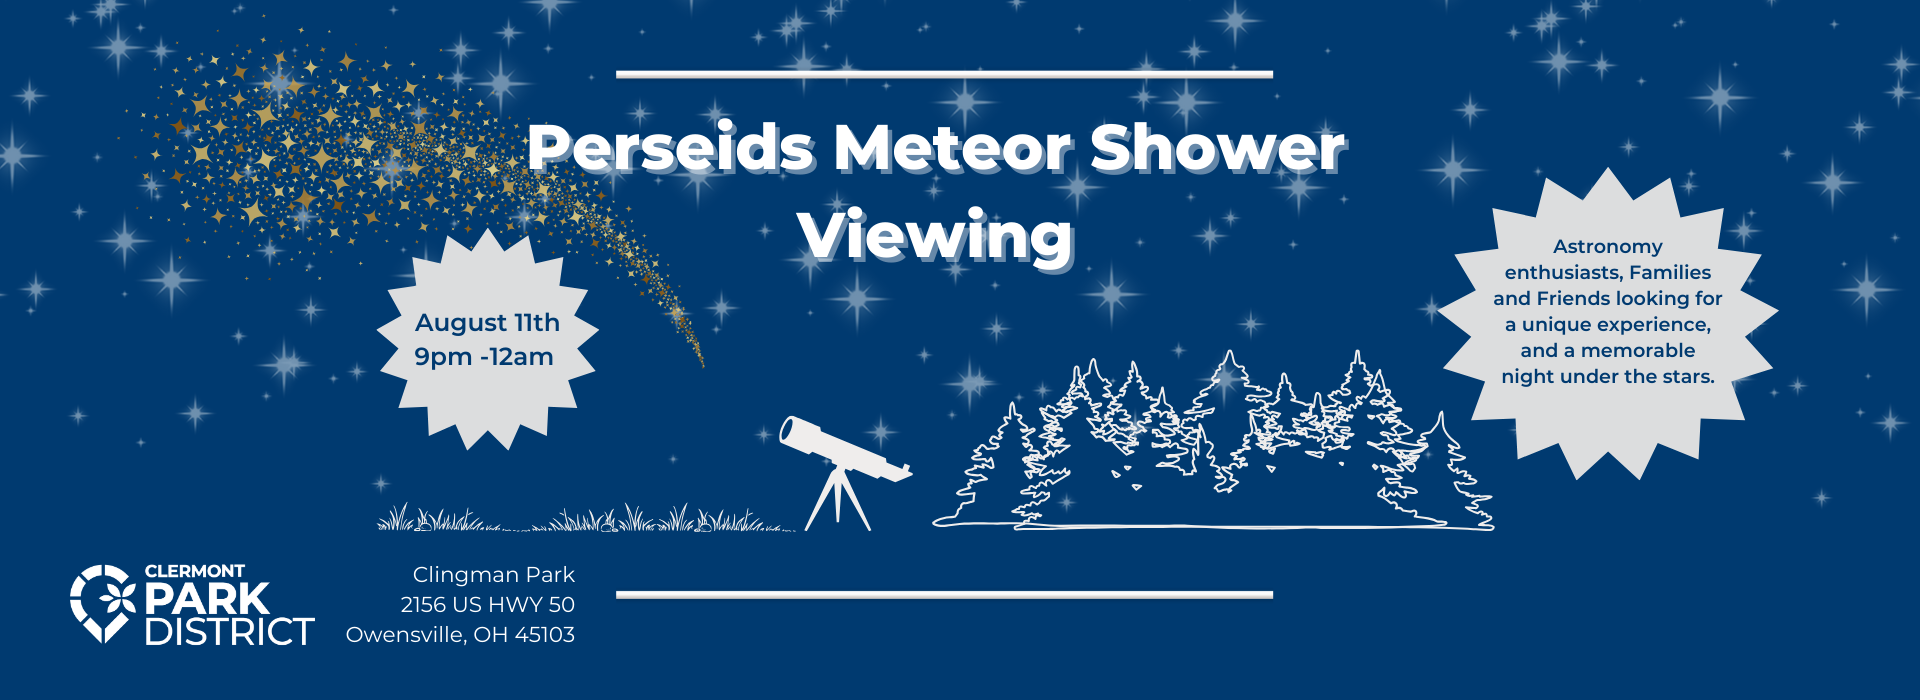 Perseid Meteor Shower Viewing August 11th 9pm-Midnight, Clingman Park